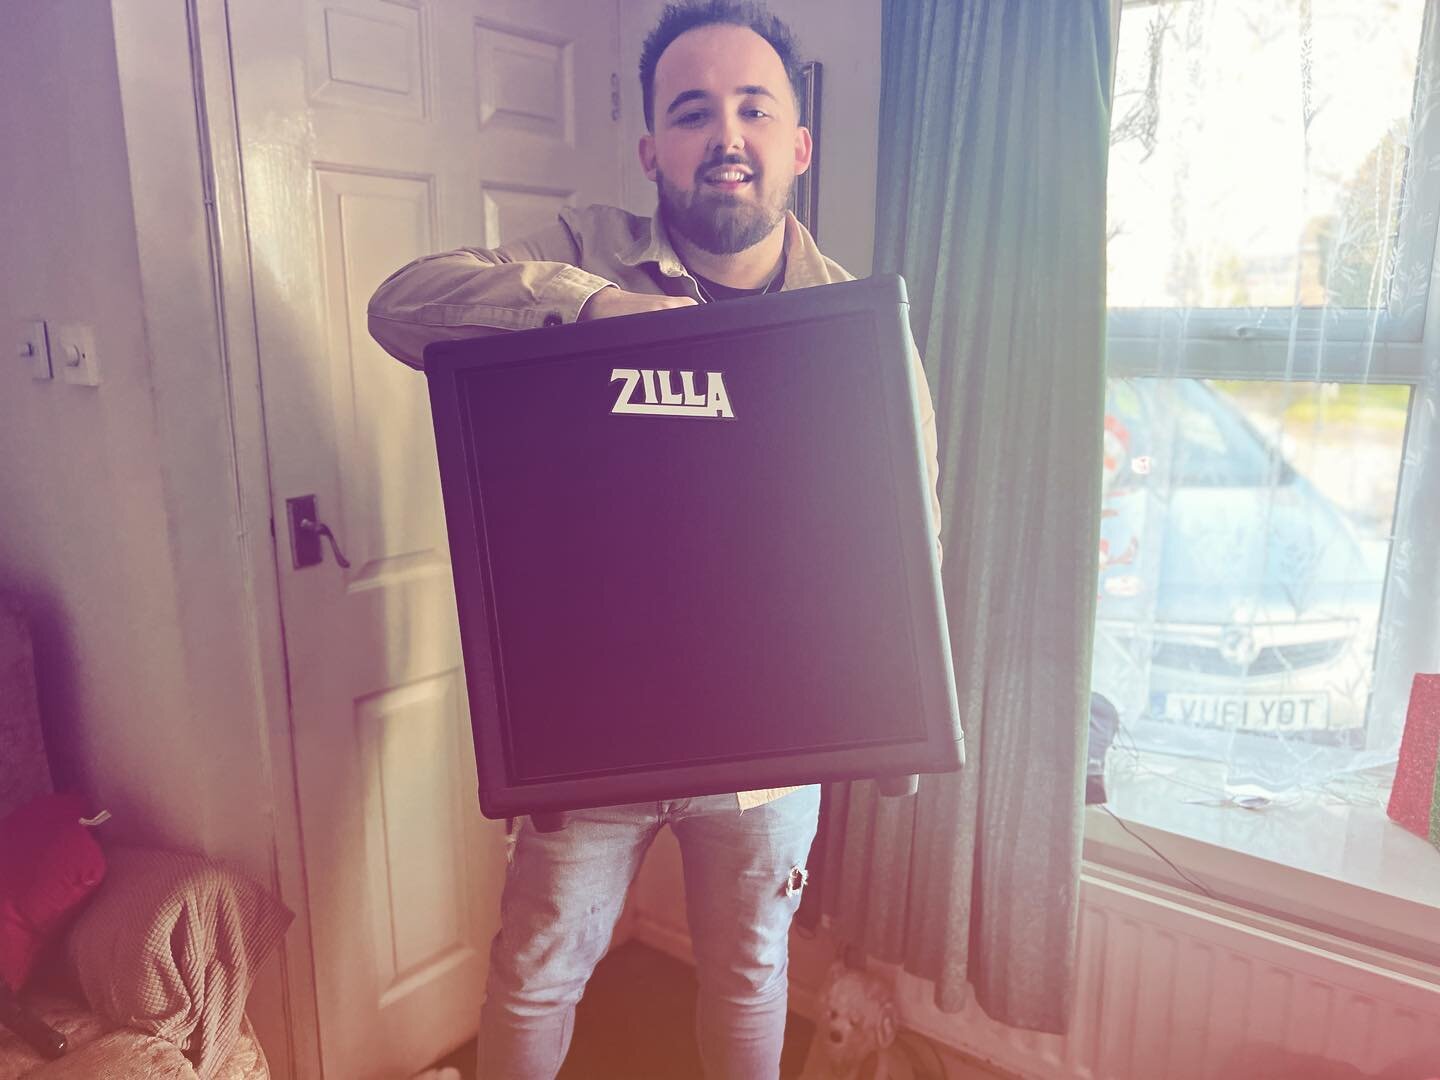 It&rsquo;s been a massive pleasure working with @zillacabs over the past couple of weeks helping them with DI Guitar tracks for re-amping with their RND department/socials. Massive shout out to Paul and Gary over at Zilla for being total legends and 